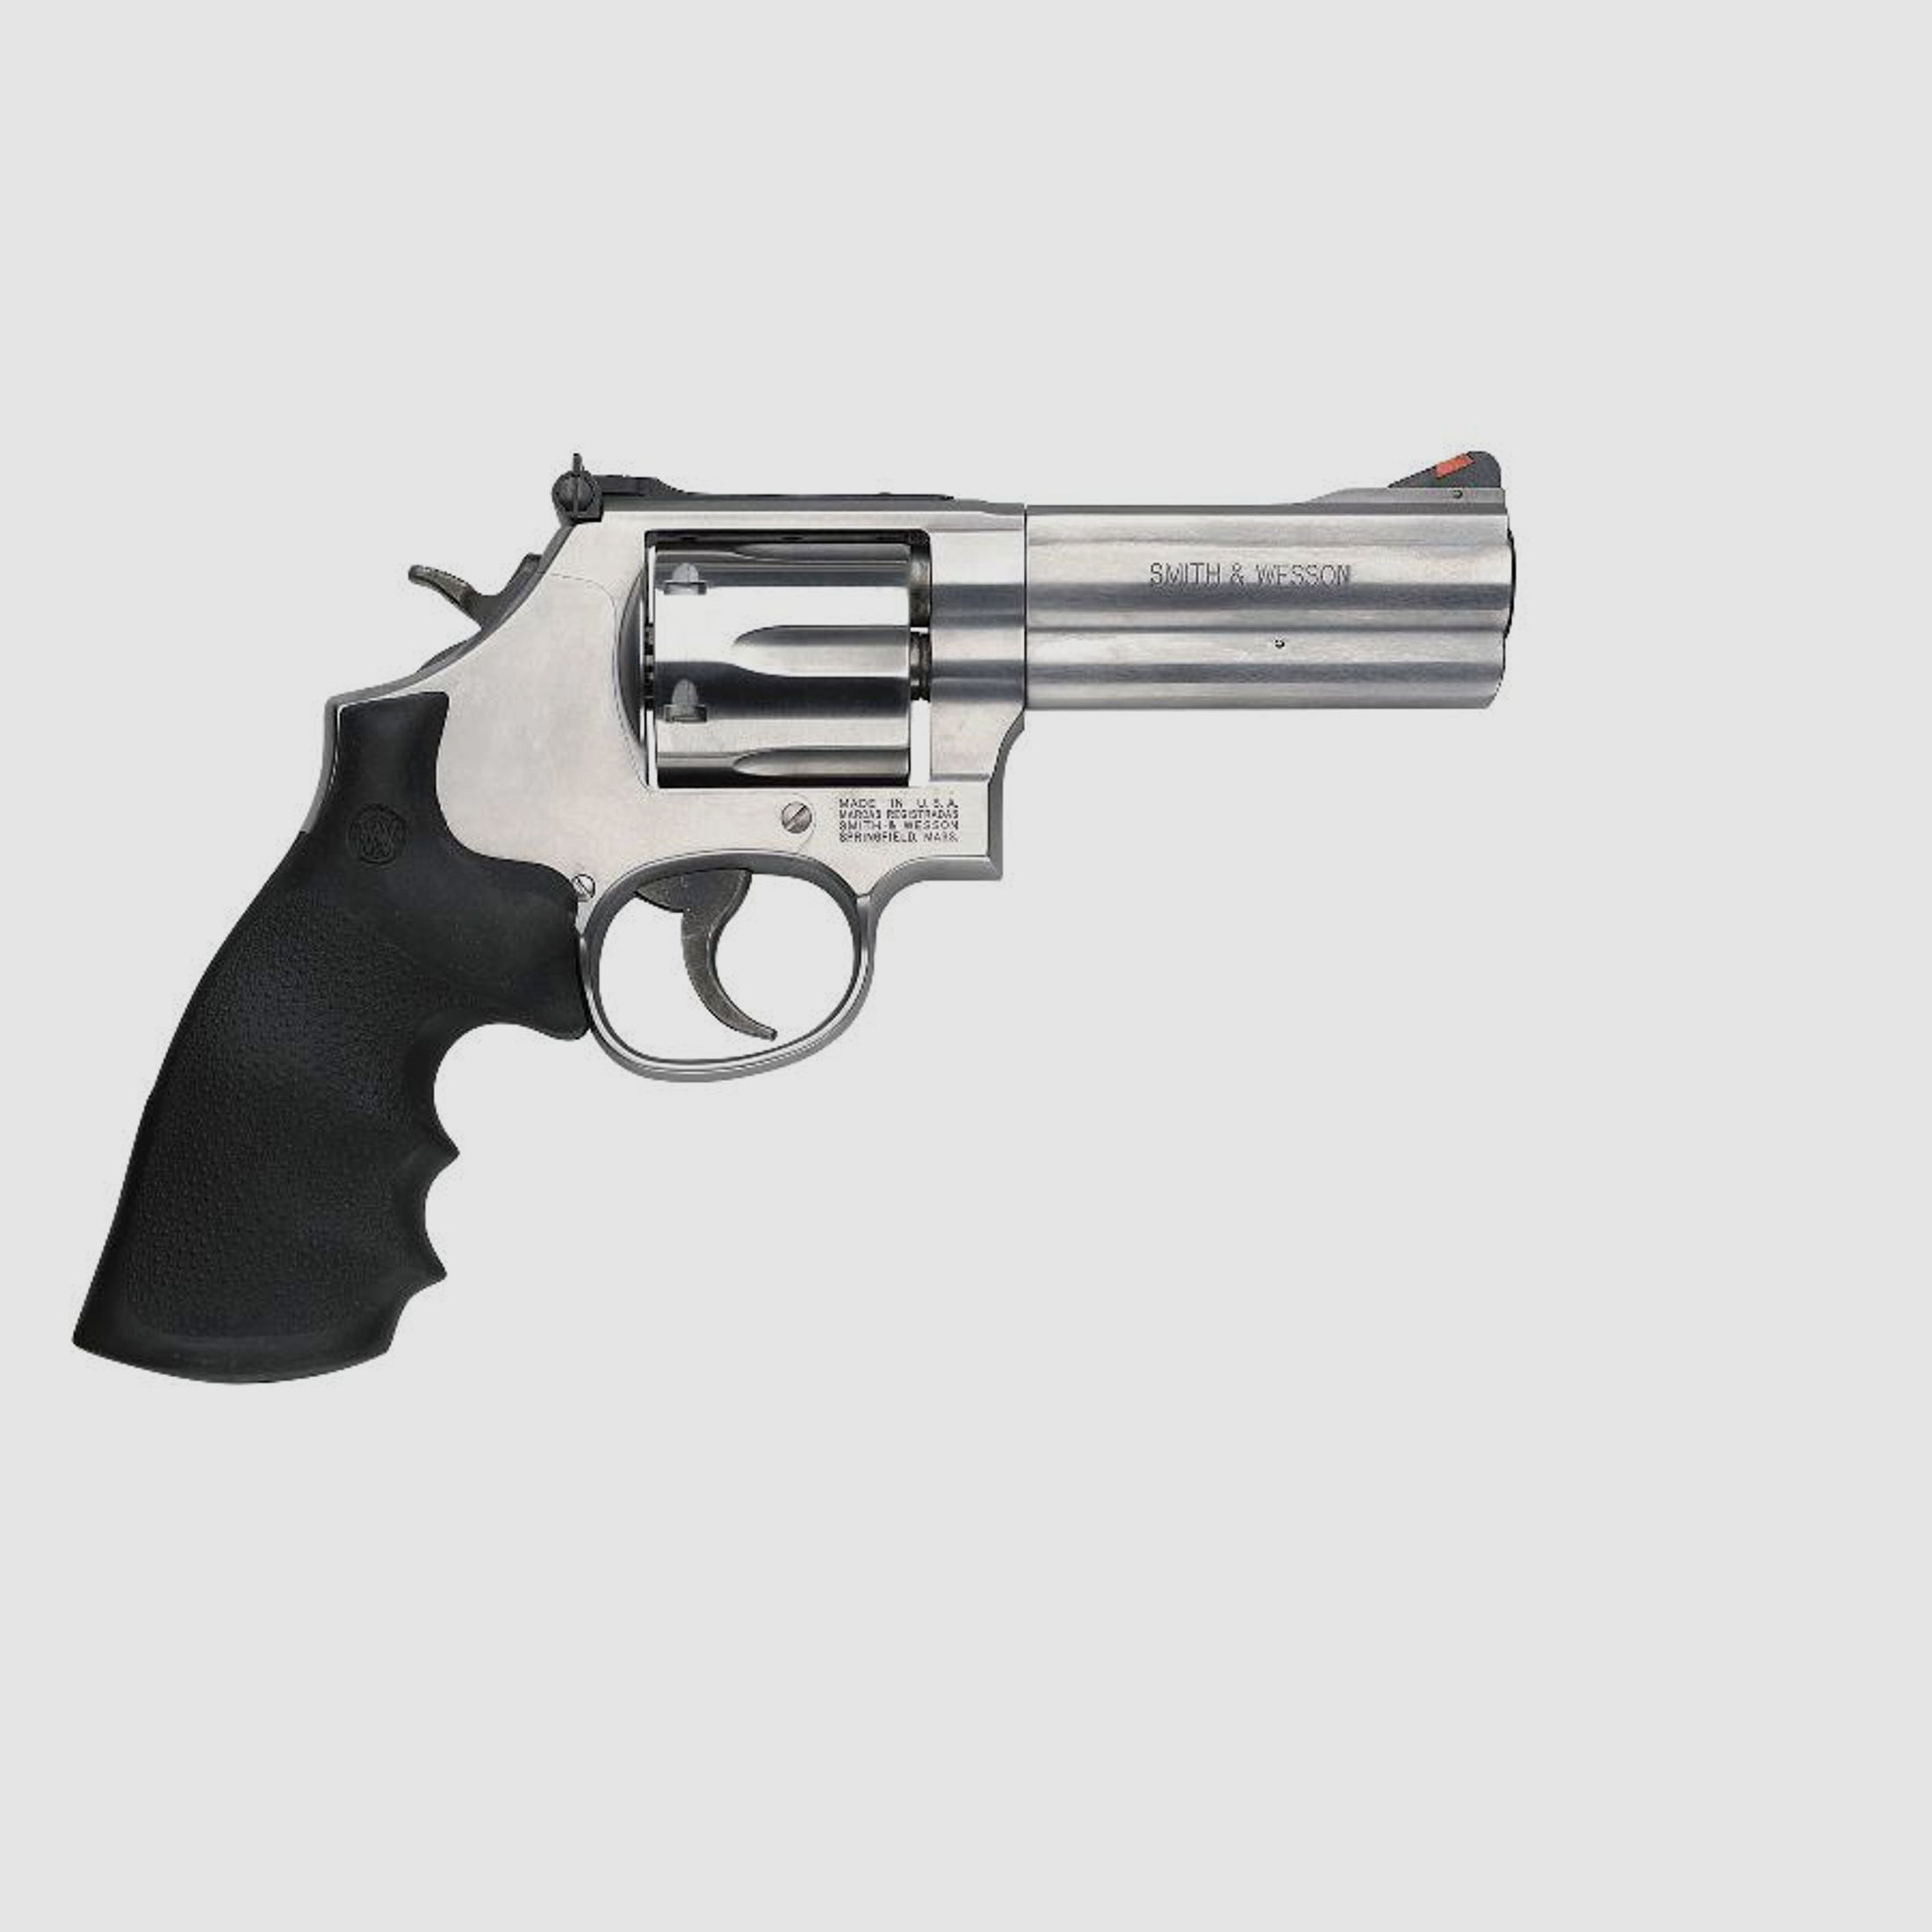 Smith & Wesson Modell 686